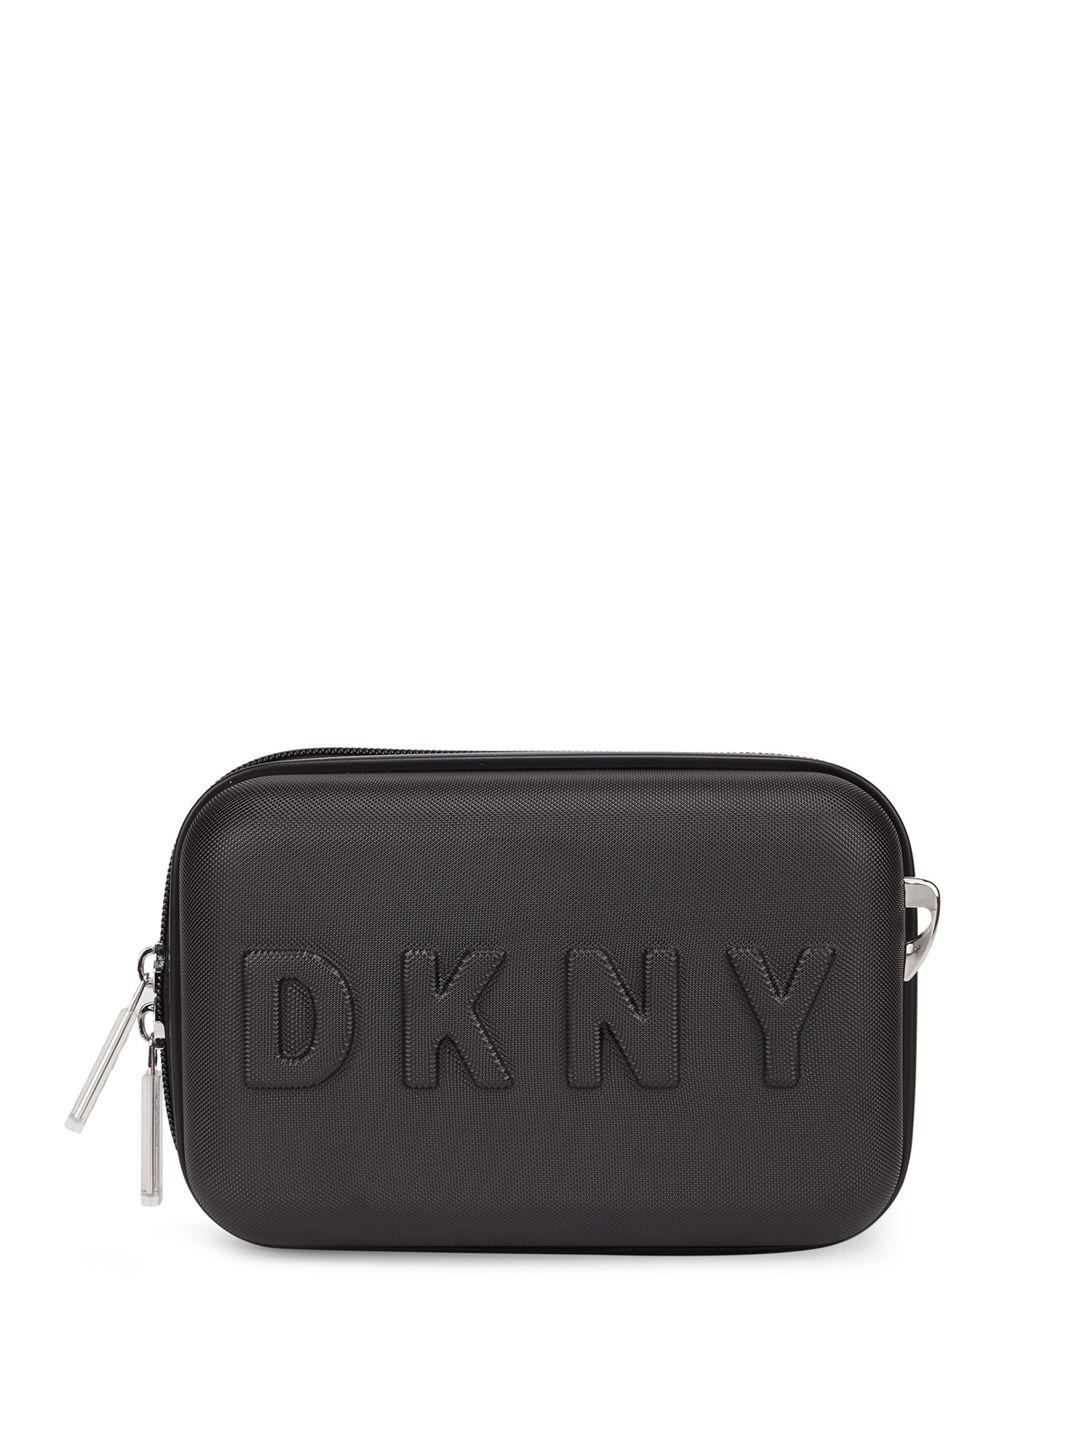 dkny abs hard beauty makeup pouch